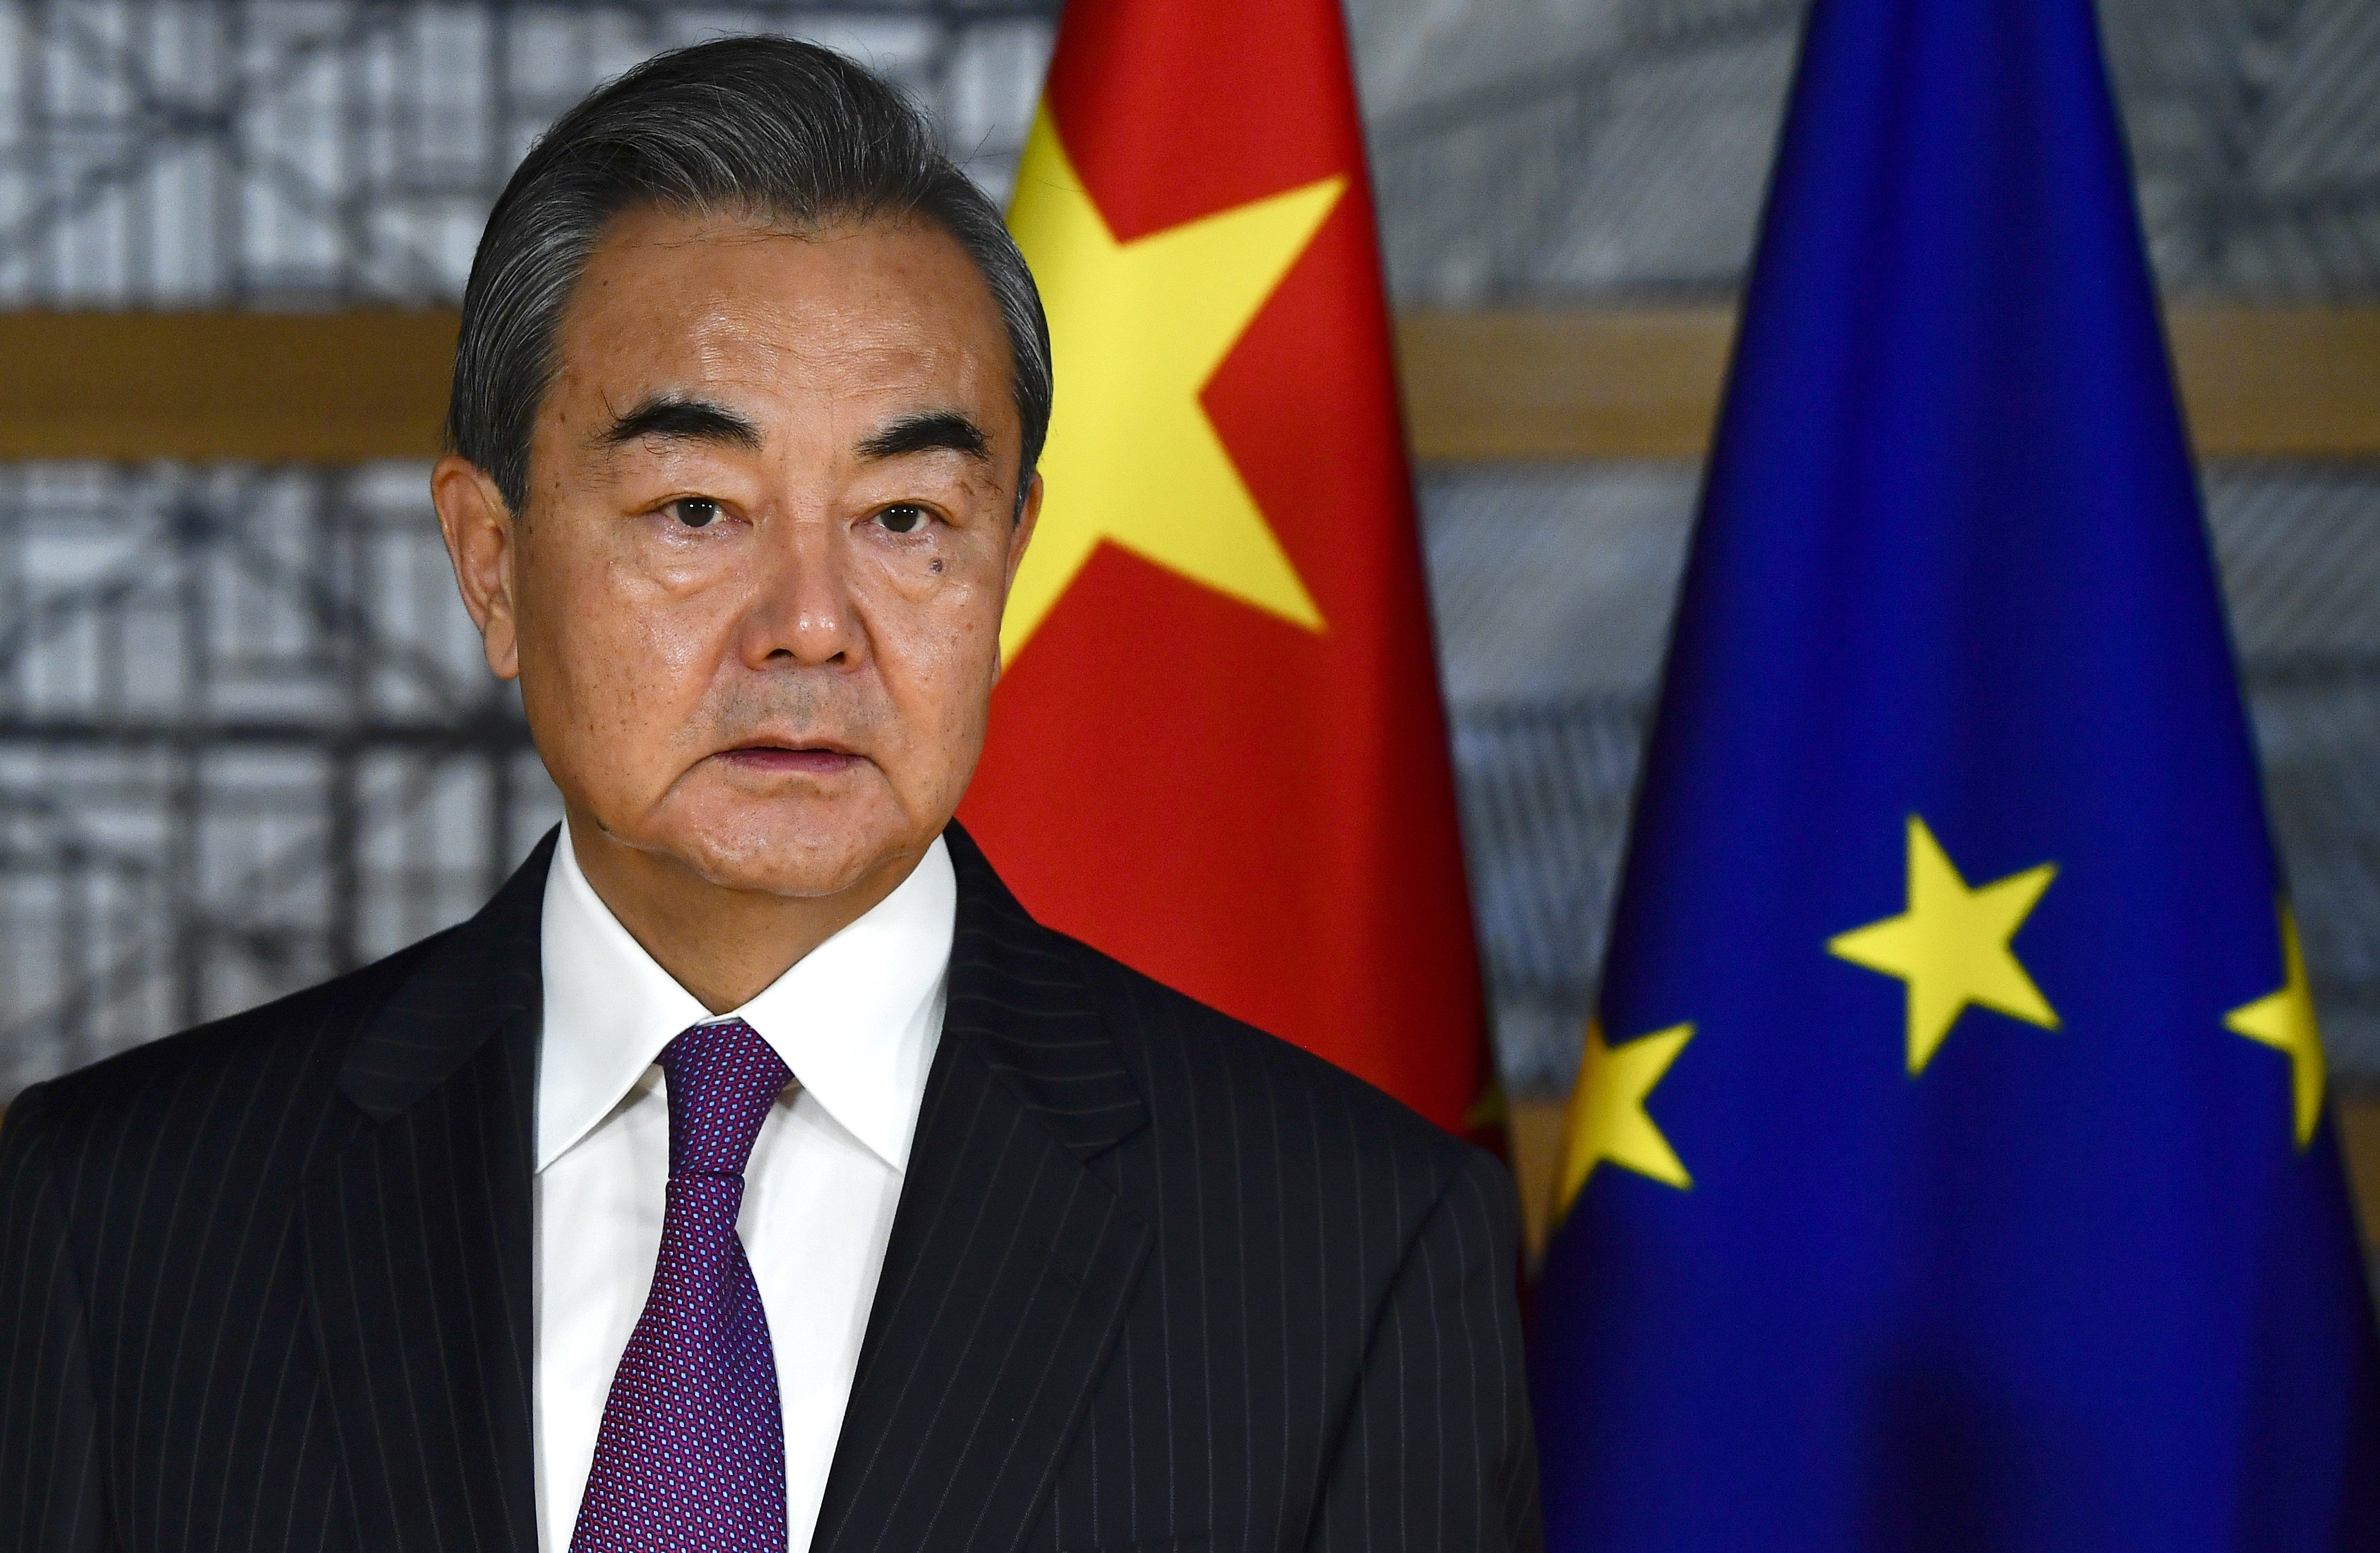 China's foreign minister Wang Yi waits for the arrival of European Council president Charles Michel prior to a meeting at the Europa building in Brussels on December 17. Photo: AP